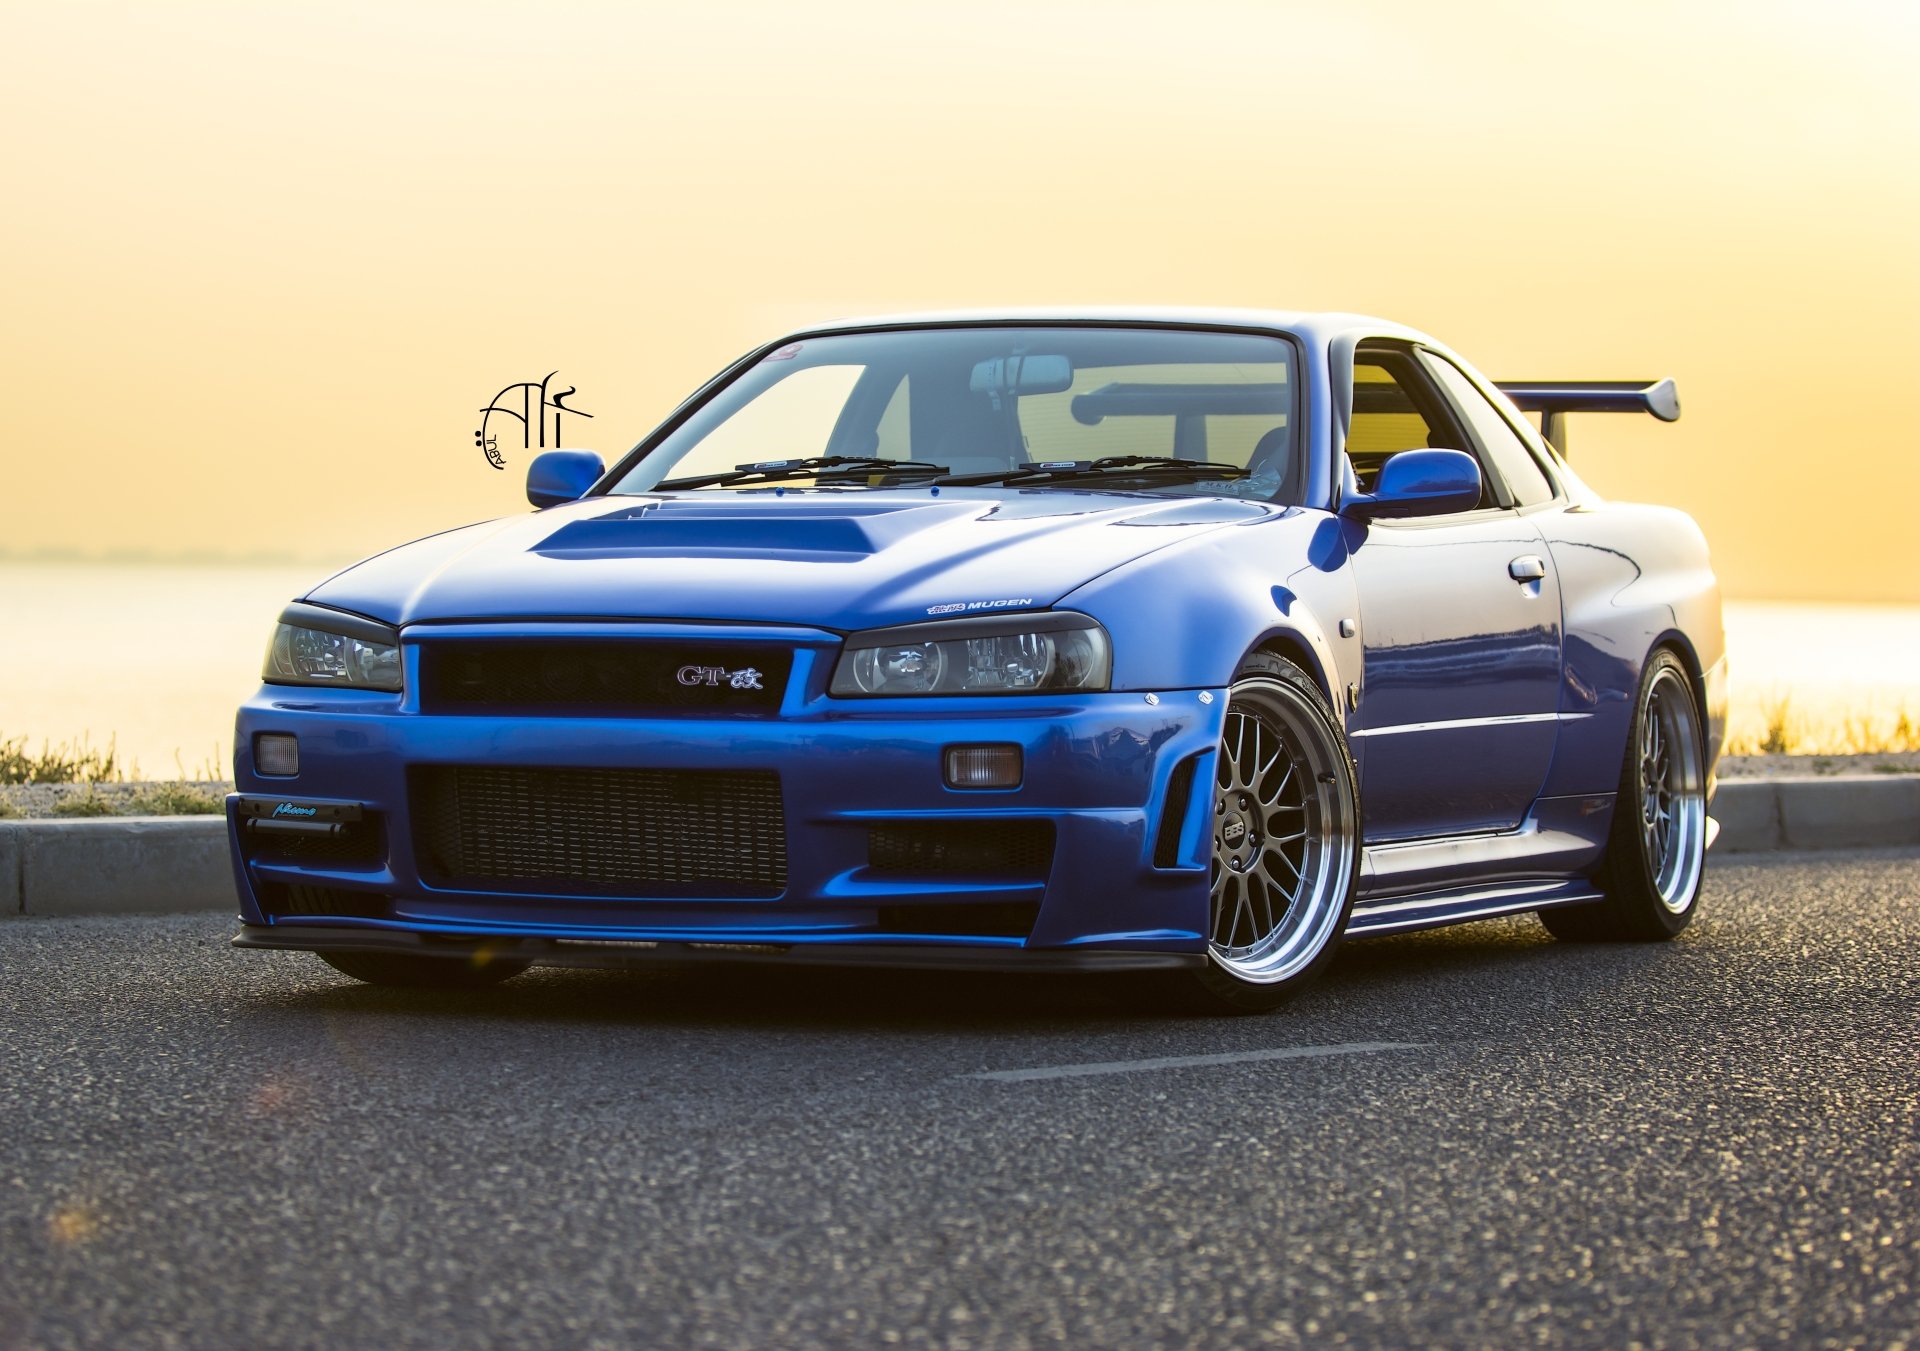 66 Nissan Skyline Hd Wallpapers Background Images Wallpaper Abyss